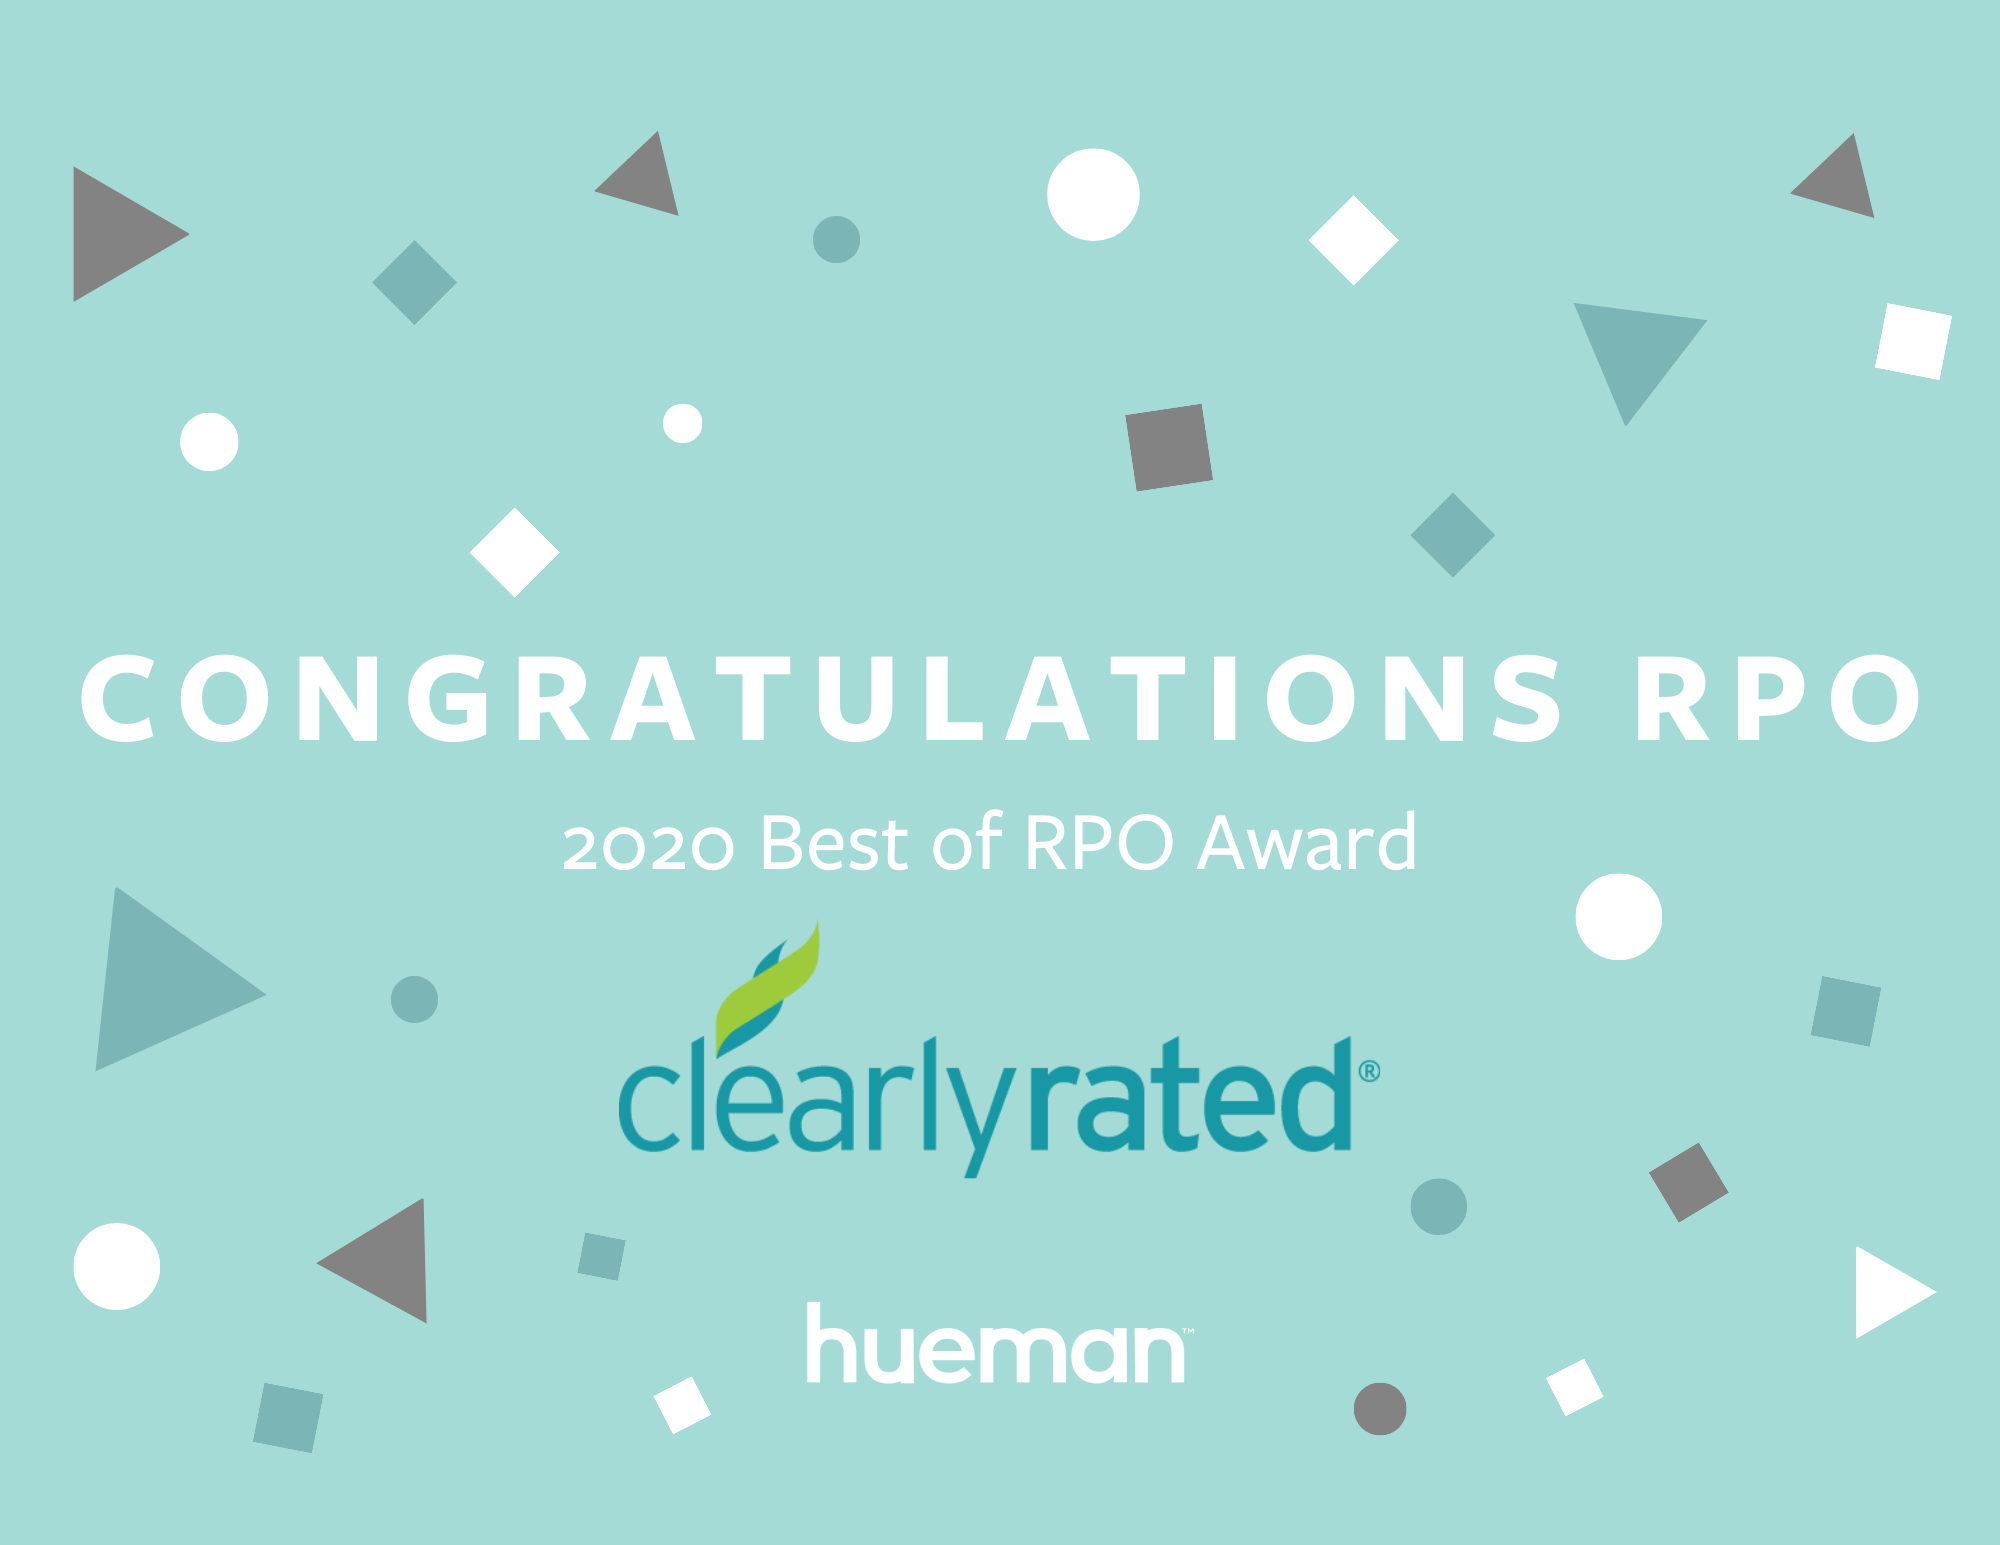 Congratulations rpo 2020 best of rpo award clearlyrated hueman